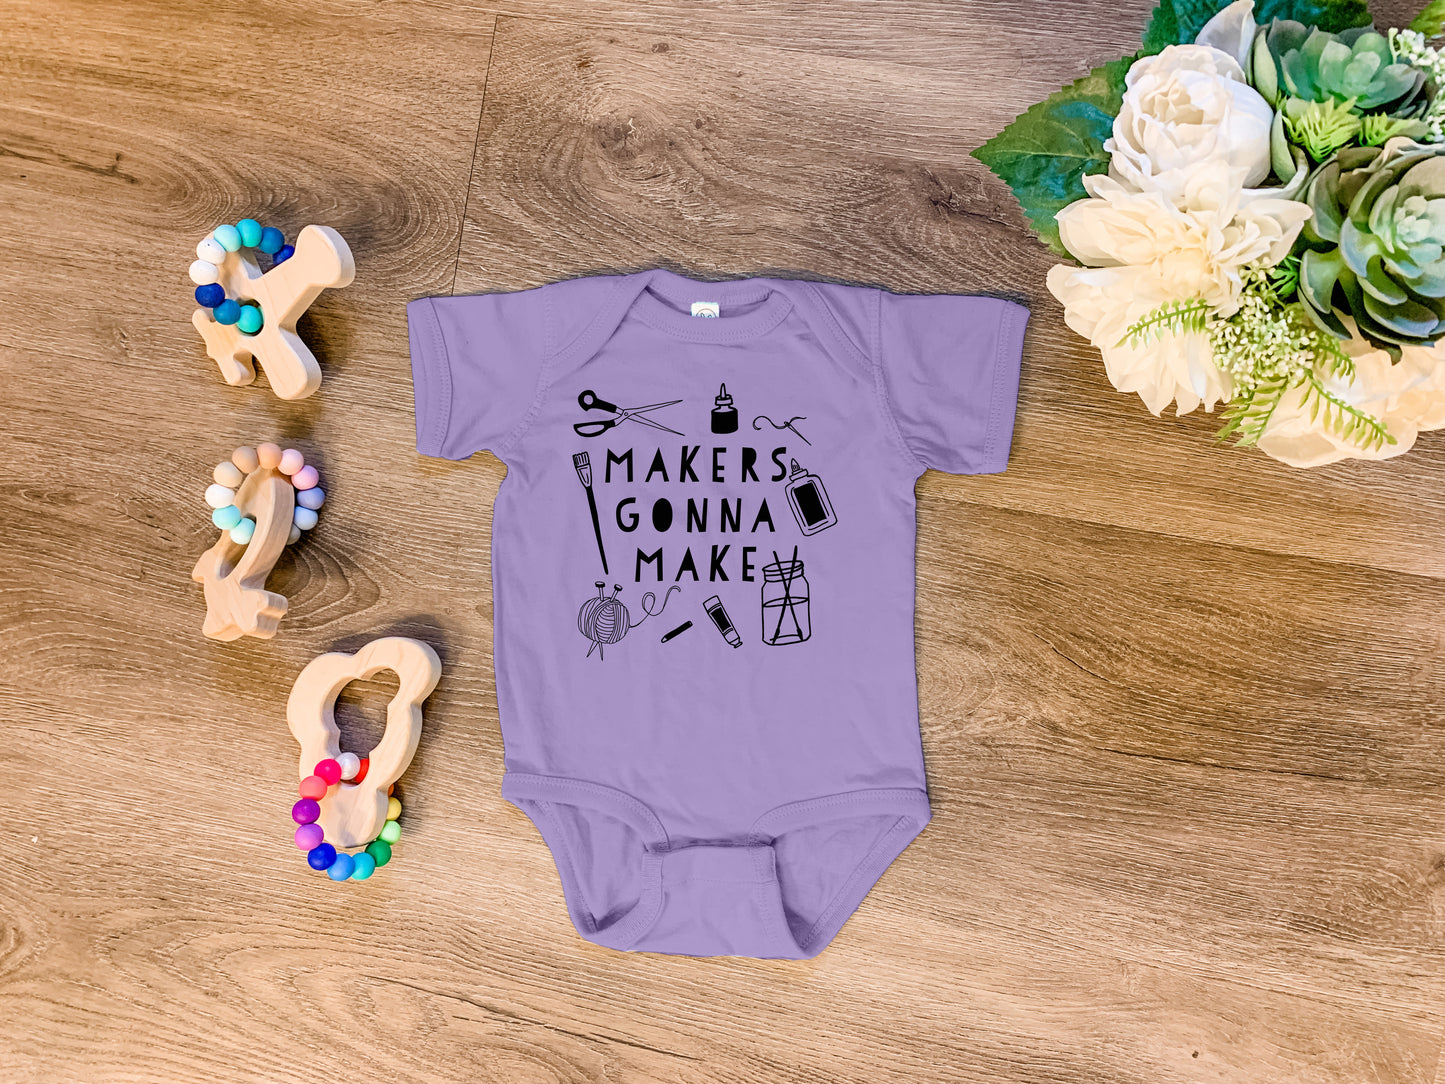 Makers Gonna Make - Onesie - Heather Gray, Chill, or Lavender